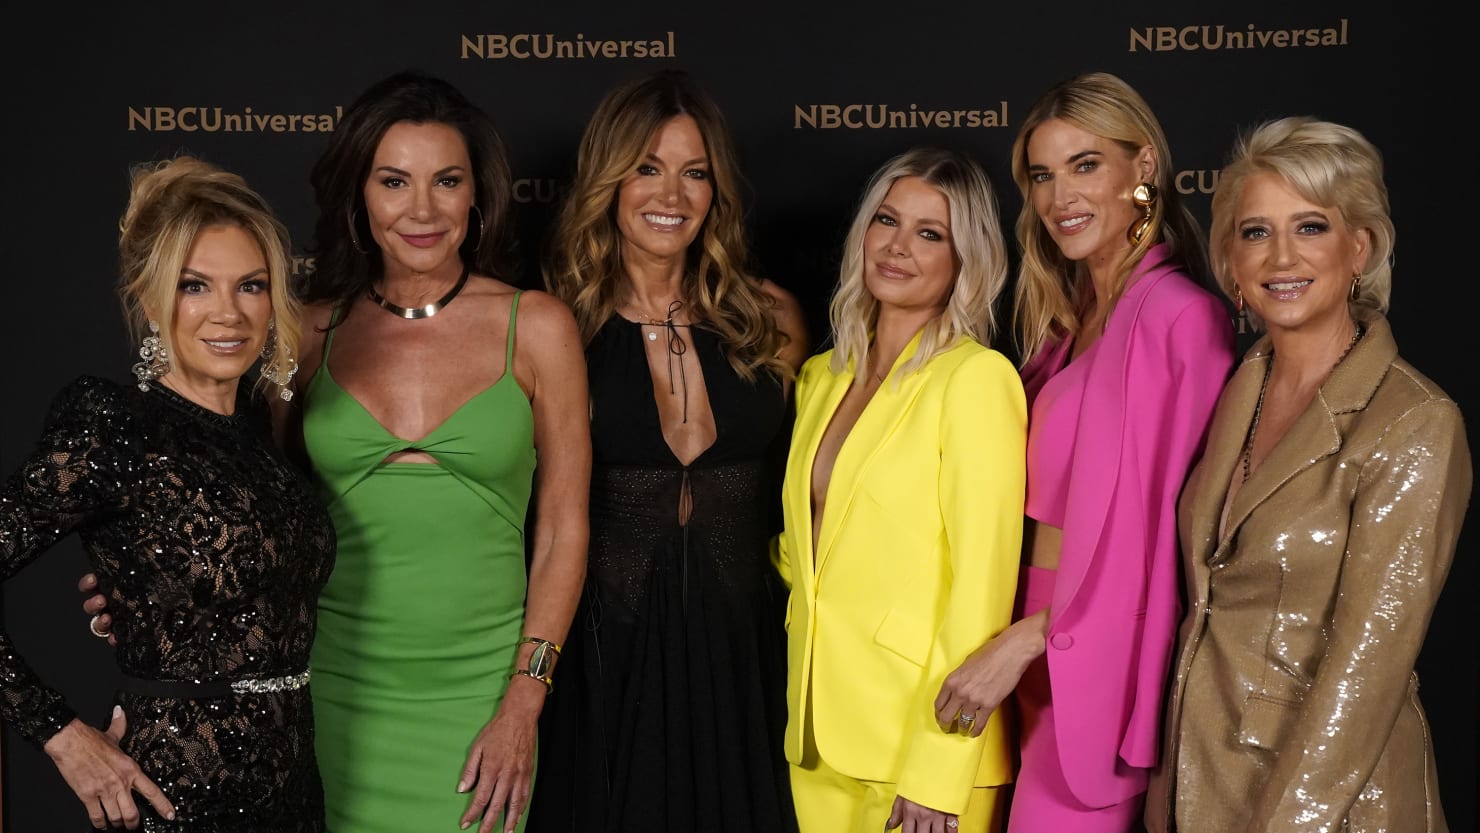 Reality Stars Want Out of NBC and Bravos Draconian NDAs